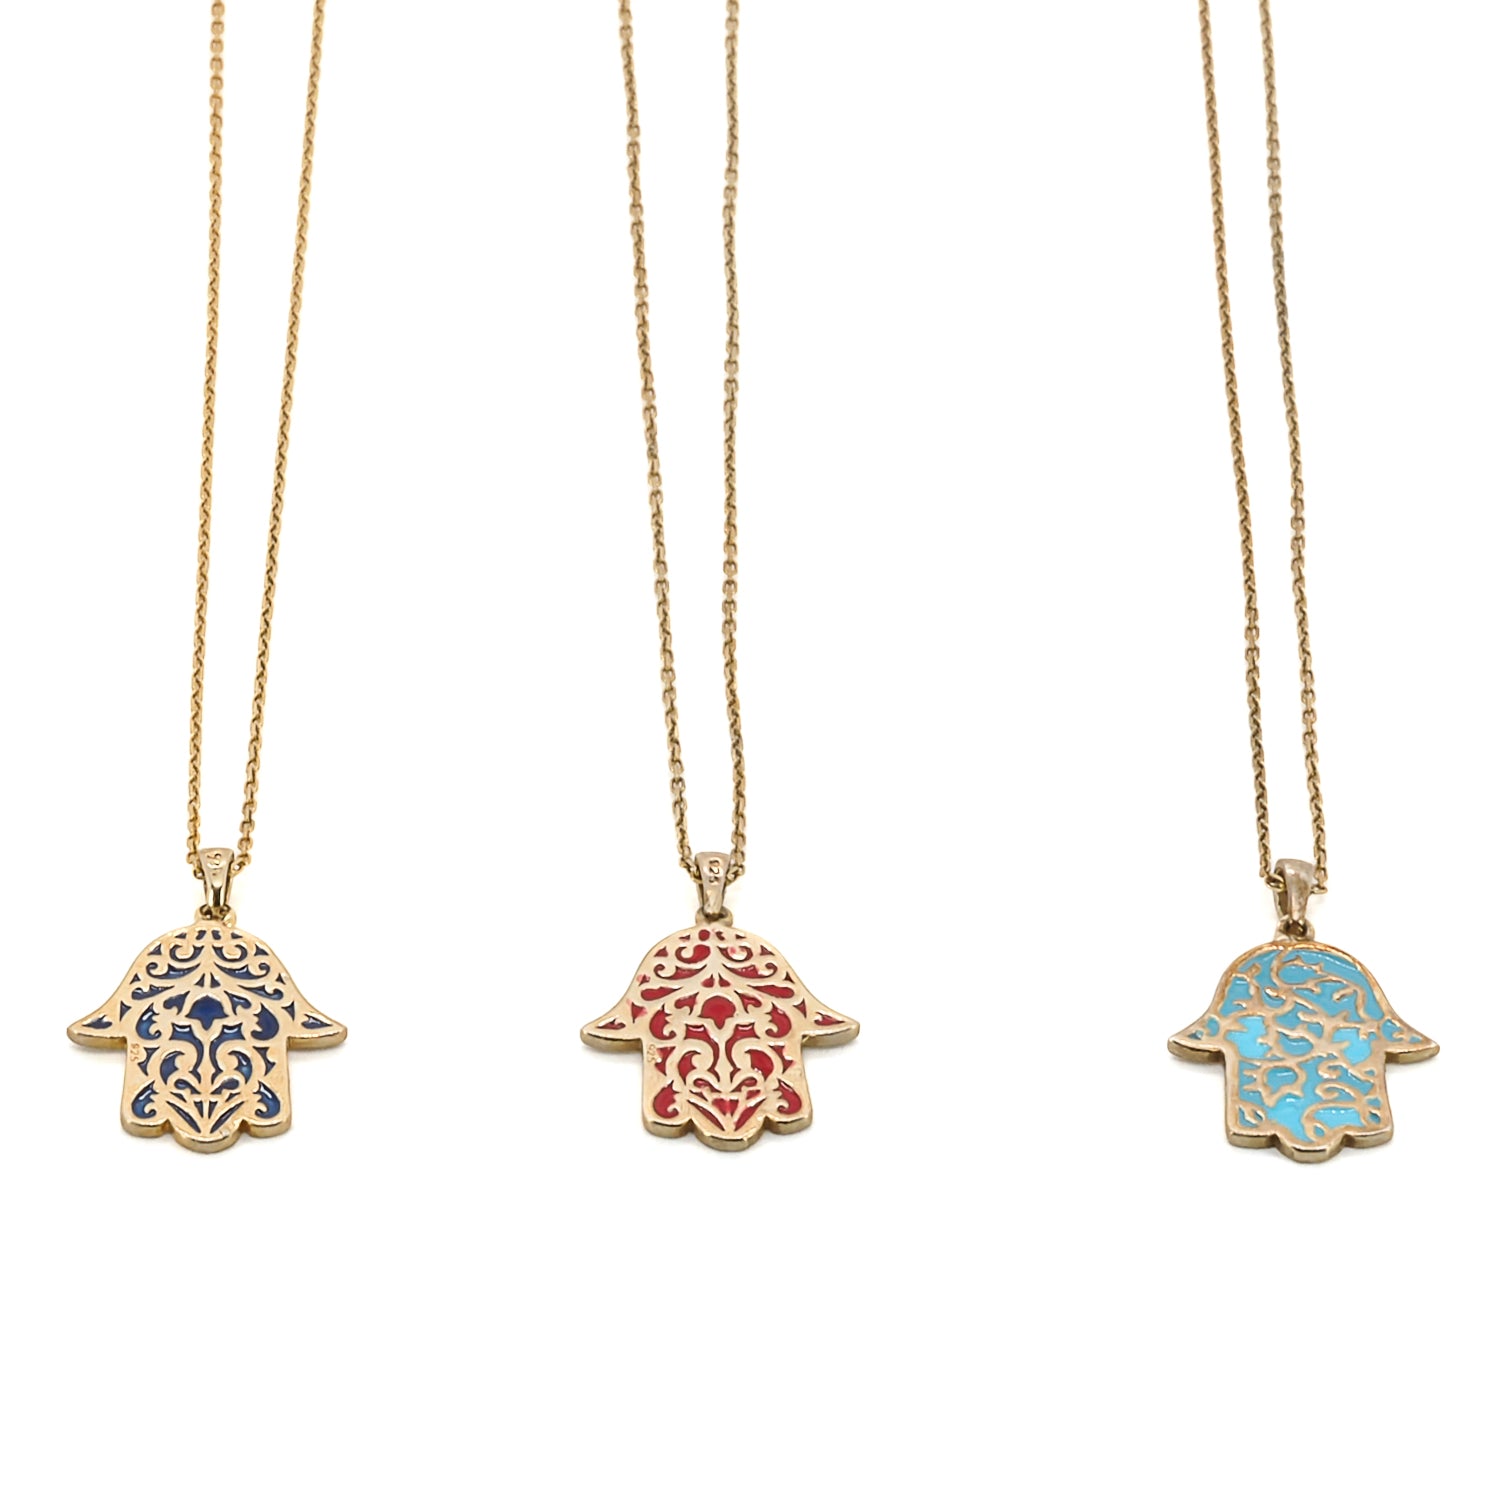 Embrace the positive energy and spiritual significance of the Stay Positive Hamsa Necklace, featuring a stunning hamsa pendant made of sterling silver and 18K gold plating with enamel accents.